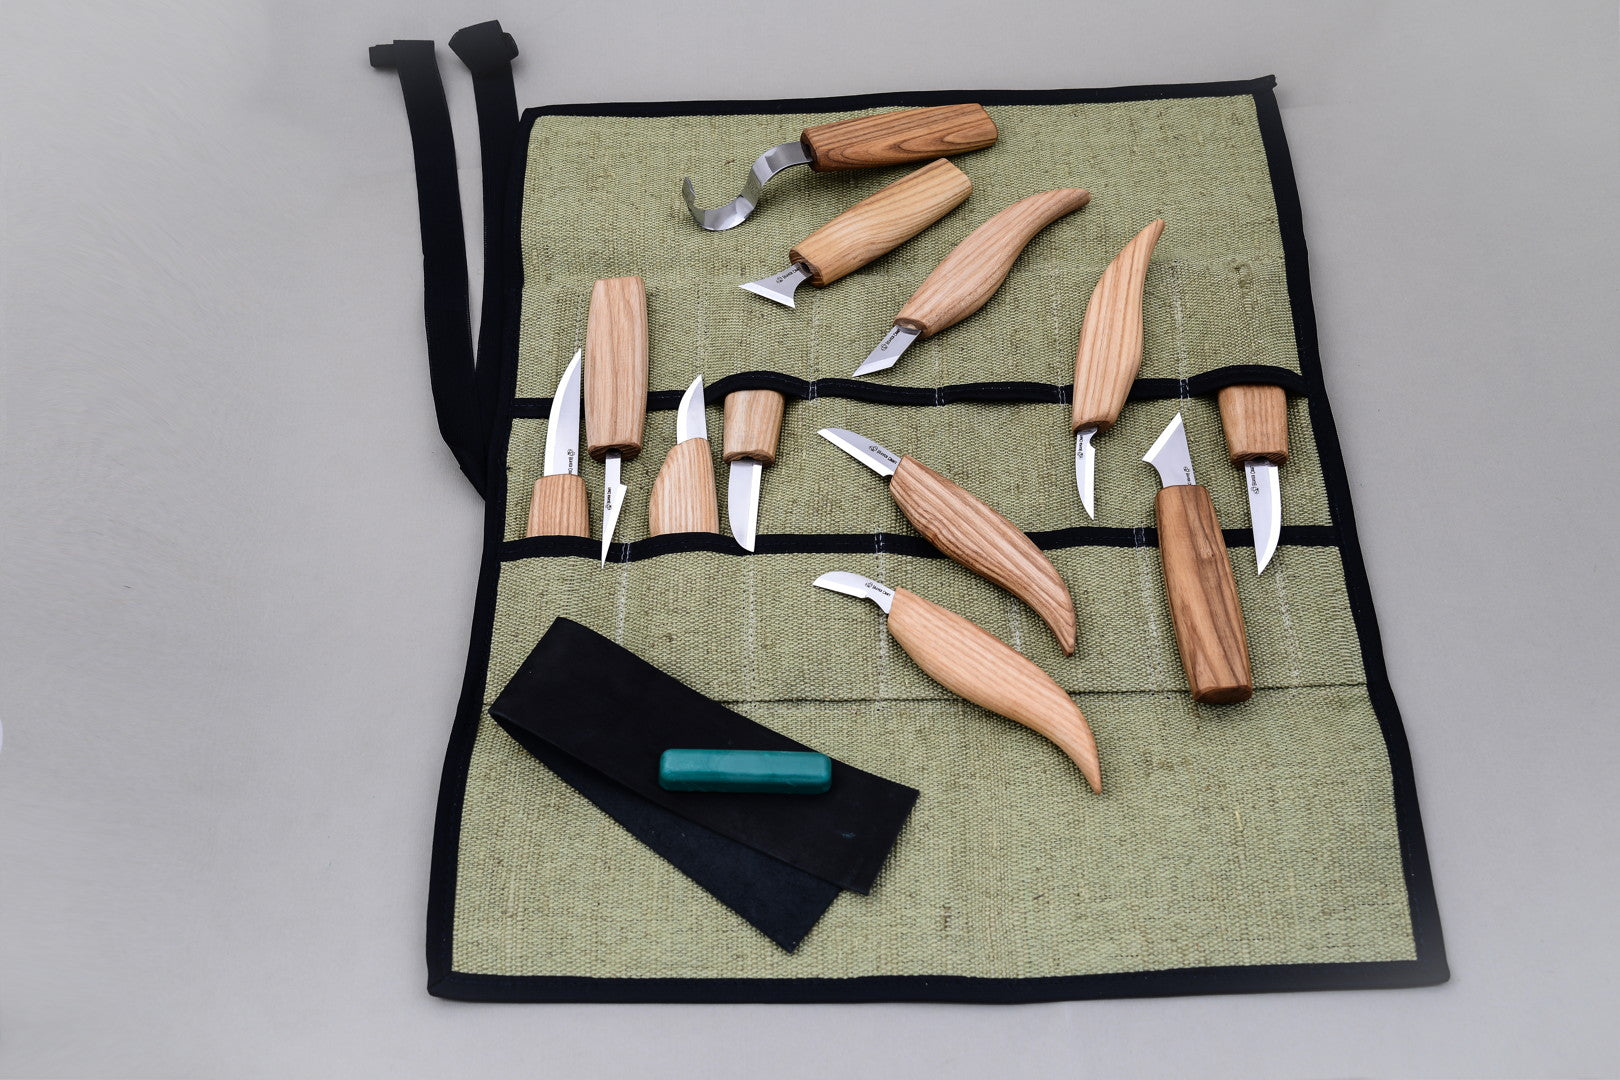 Professional left handed wood carving set with sharpening accessories –  BeaverCraft Tools